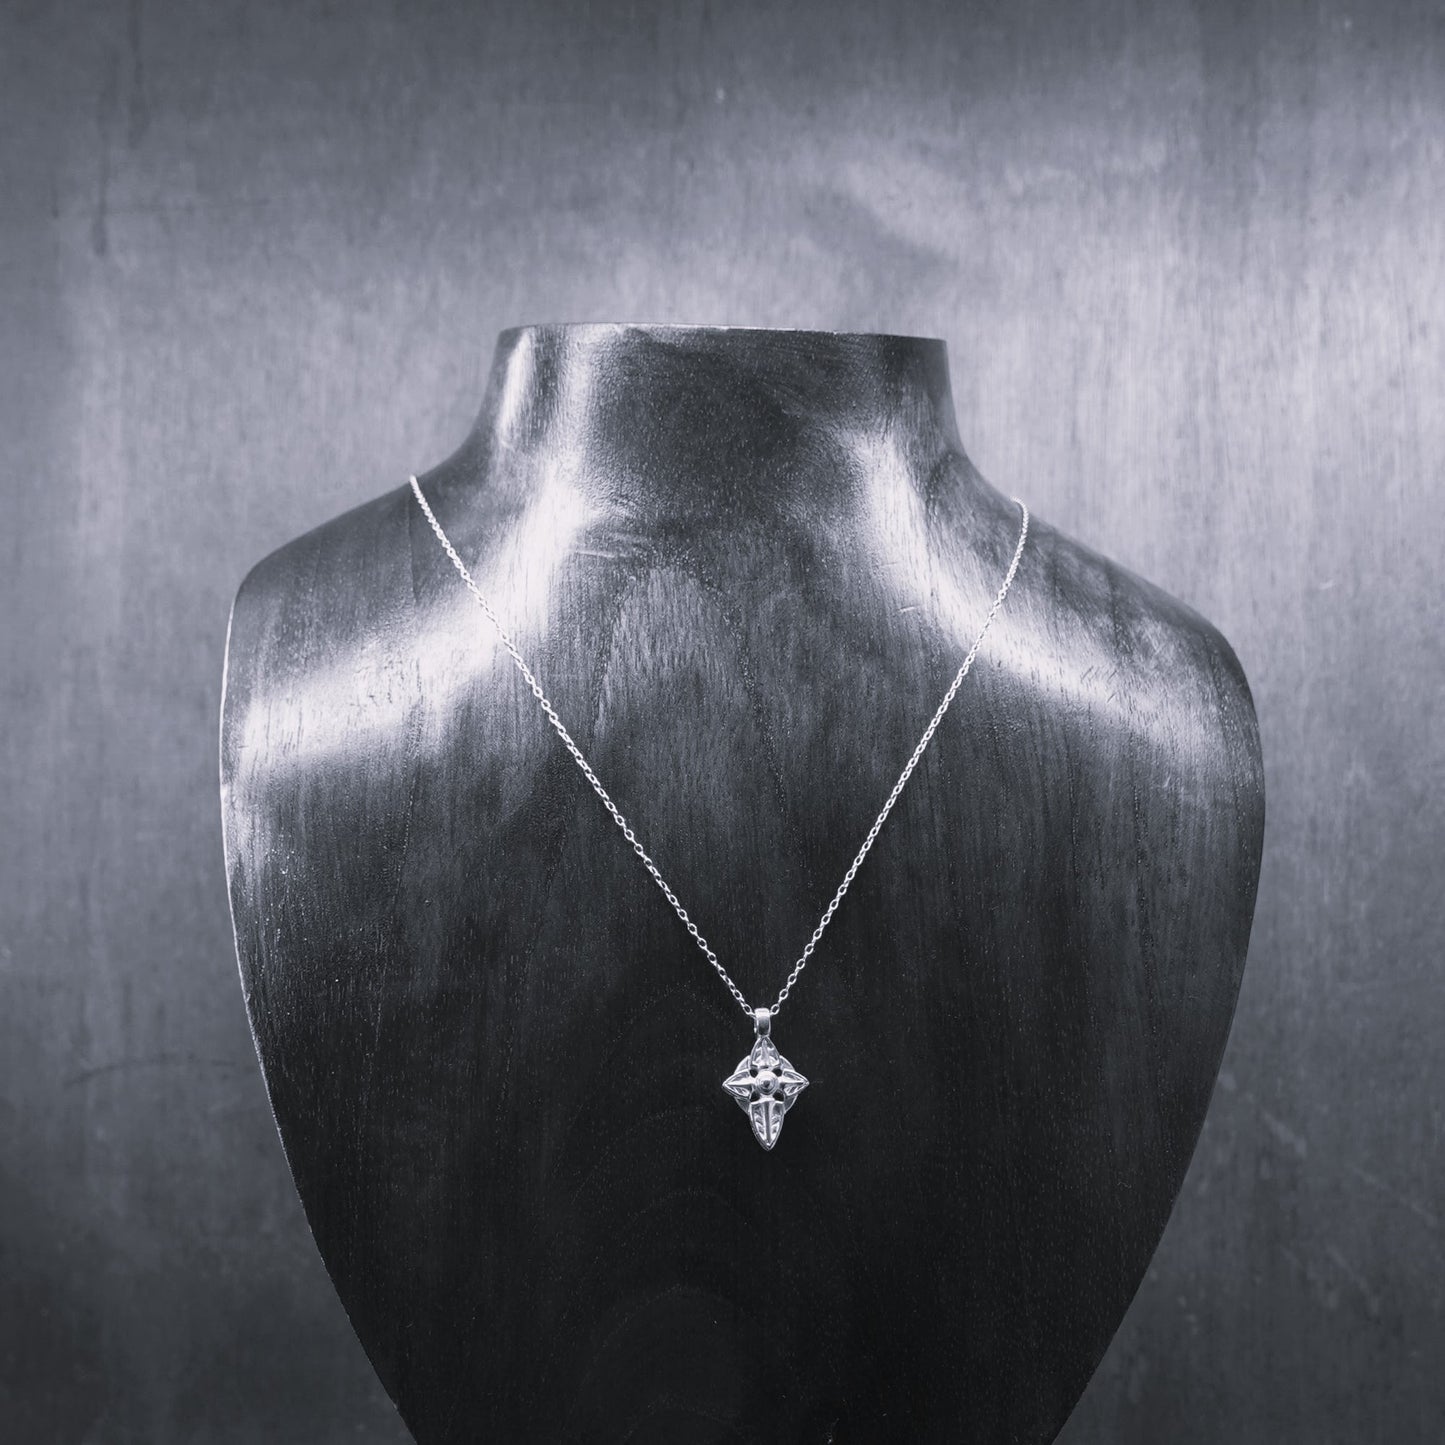 Platinum Cross charm with a solid platinum chain. Made to order. © Adrian Ashley